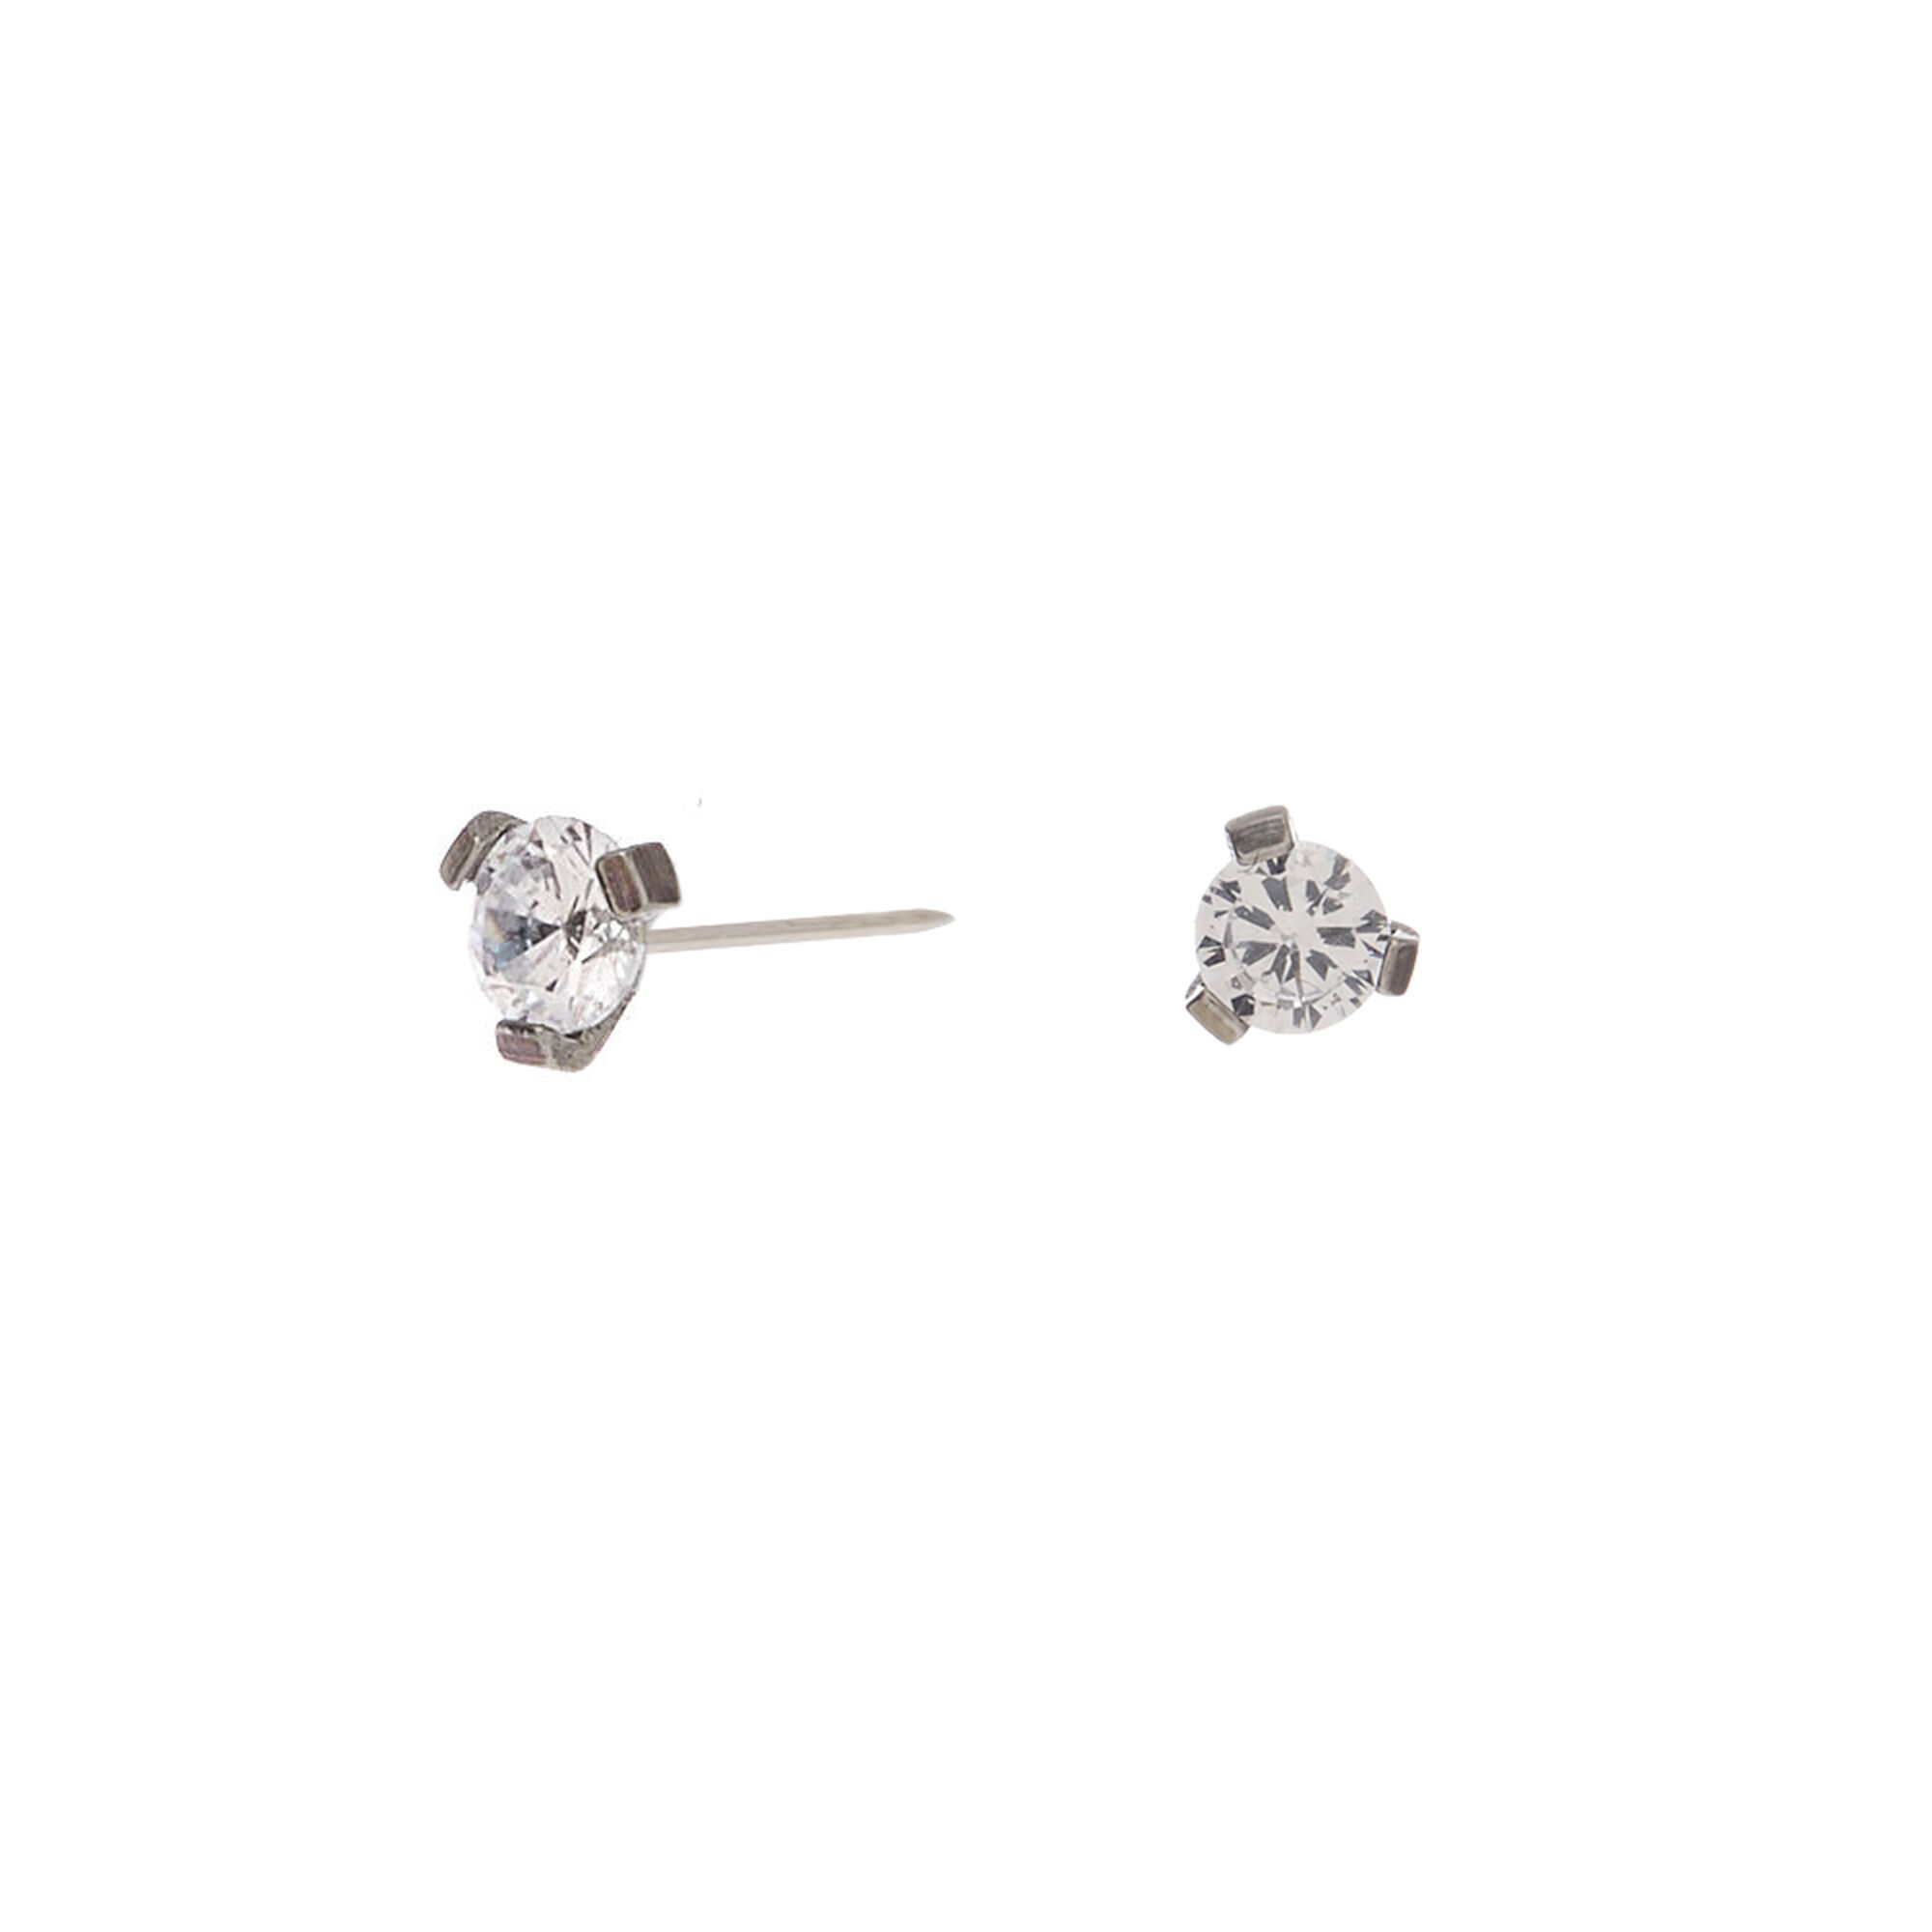 View Claires Titanium Cubic Zirconia 3MM Round Stud Earrings Silver information